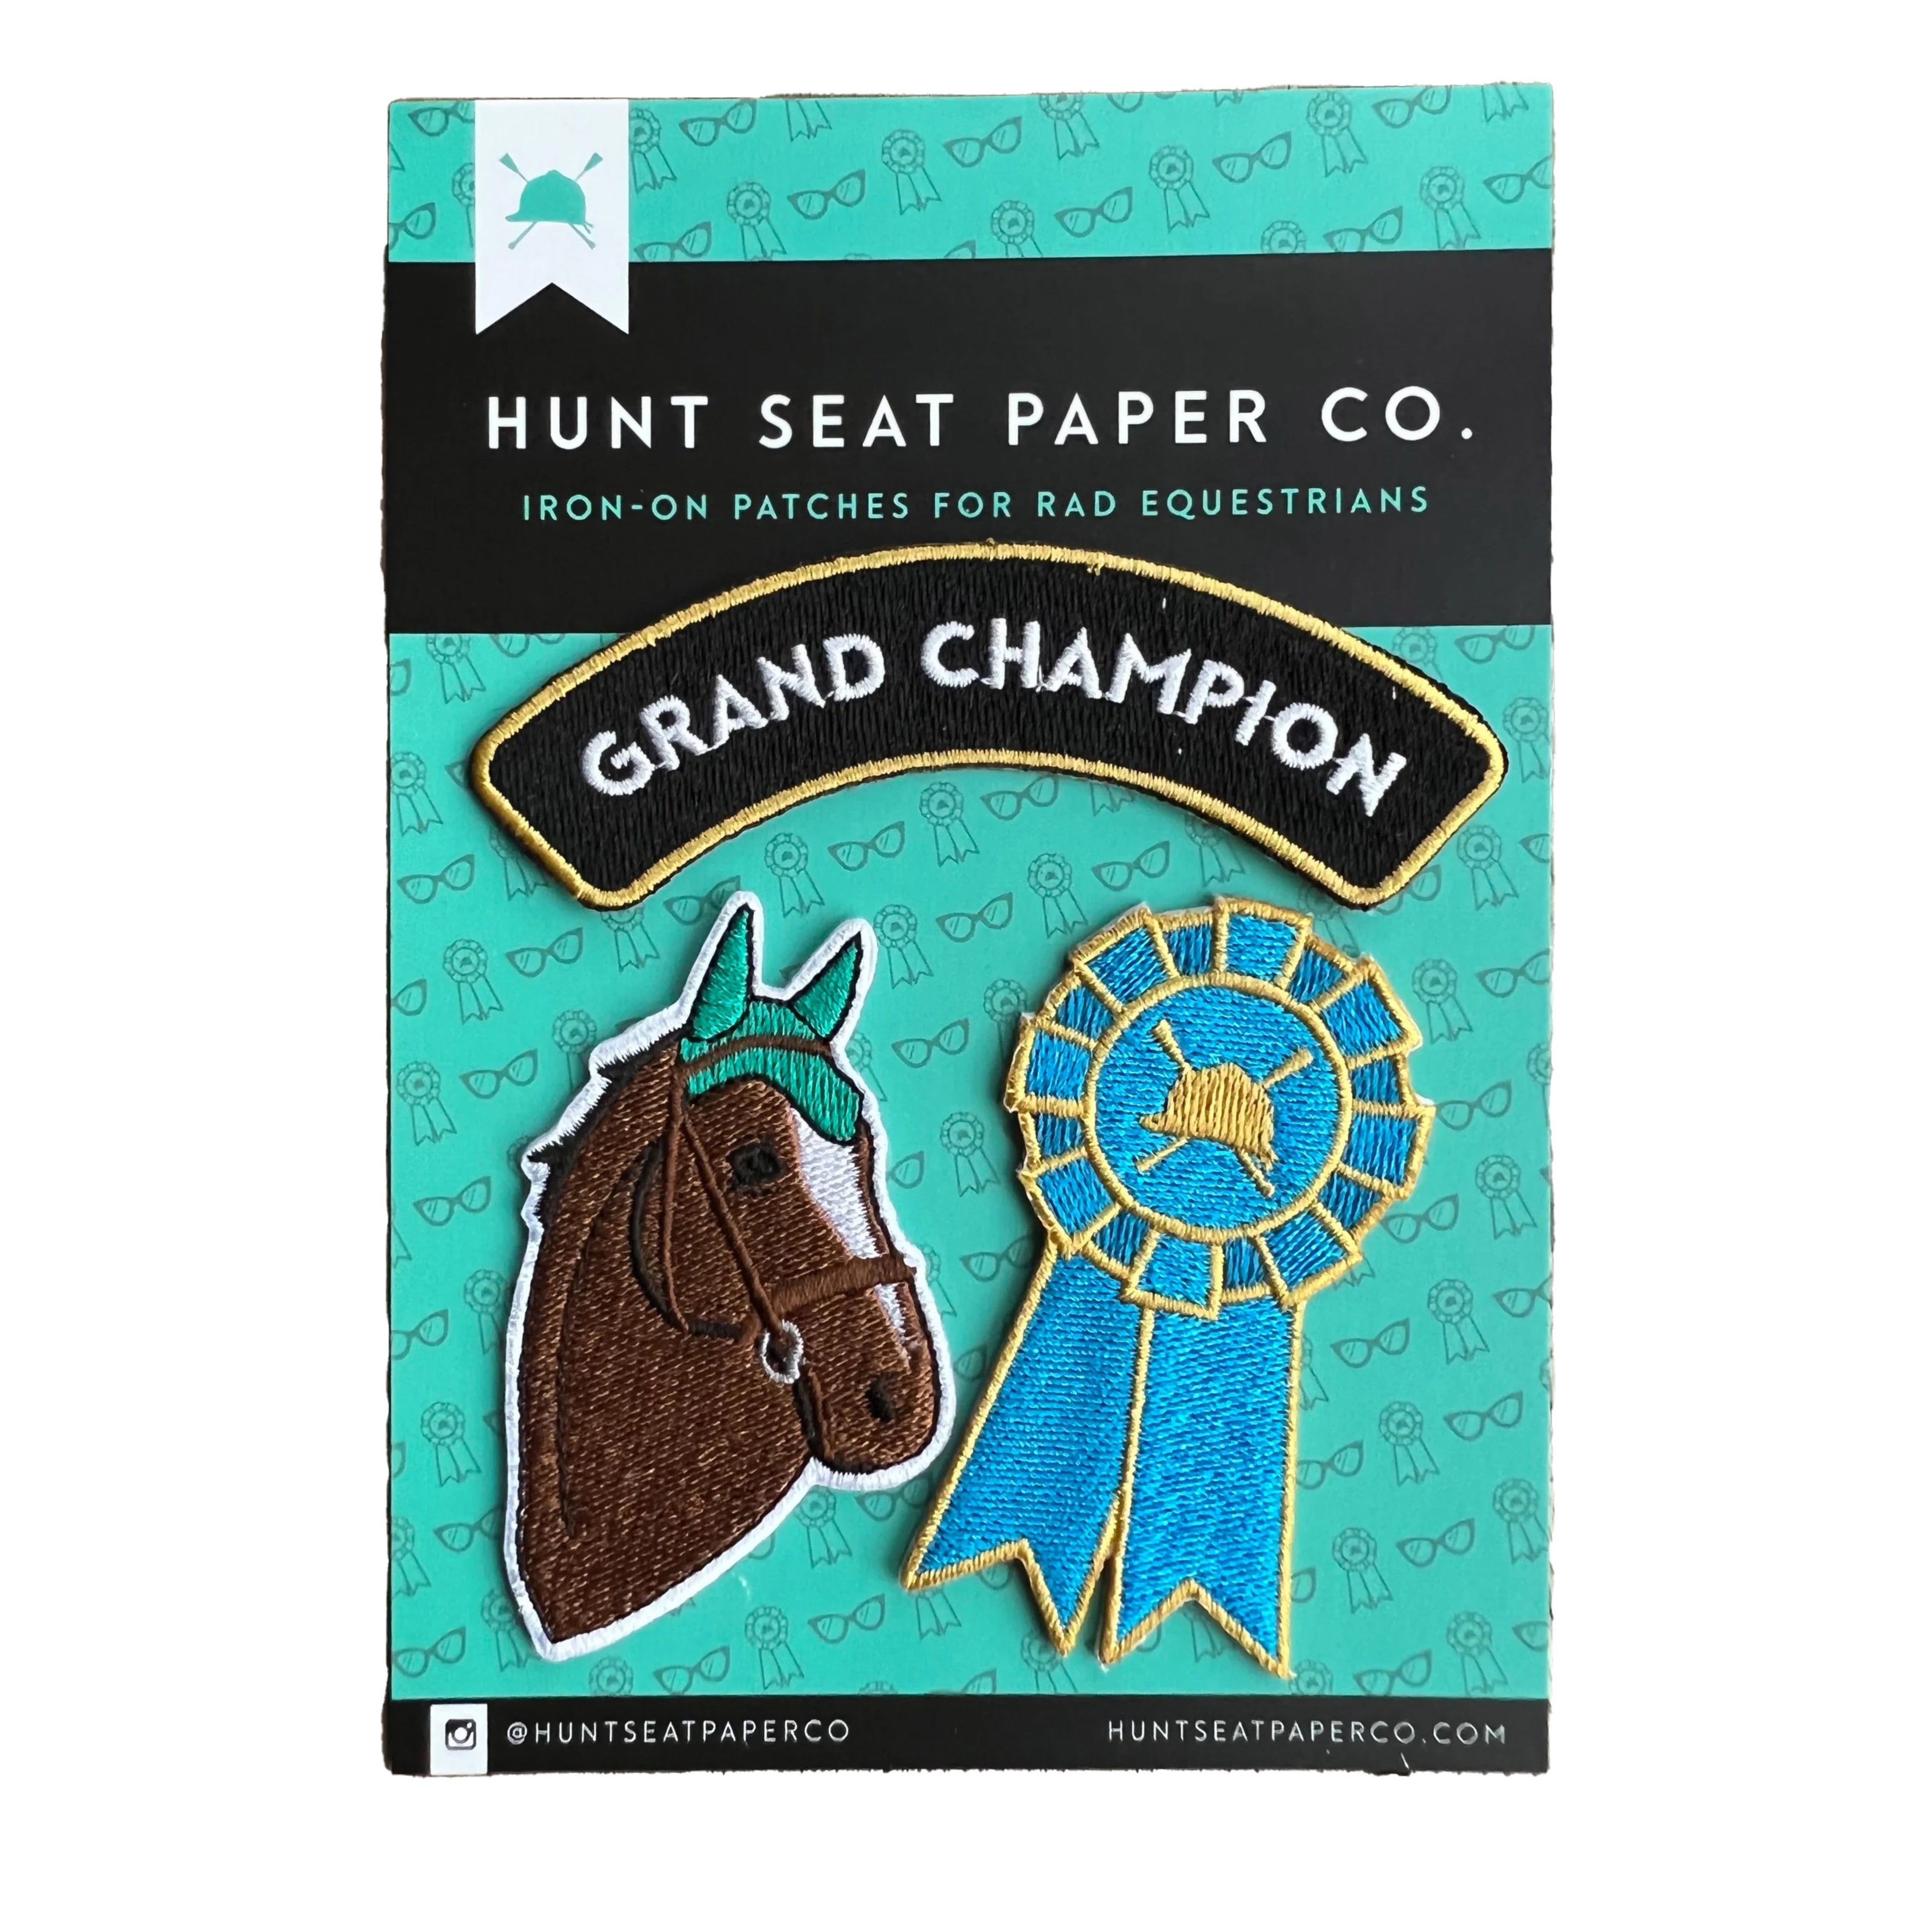 Hunt Seat Paper Co. Equestrian Iron-On Patch set